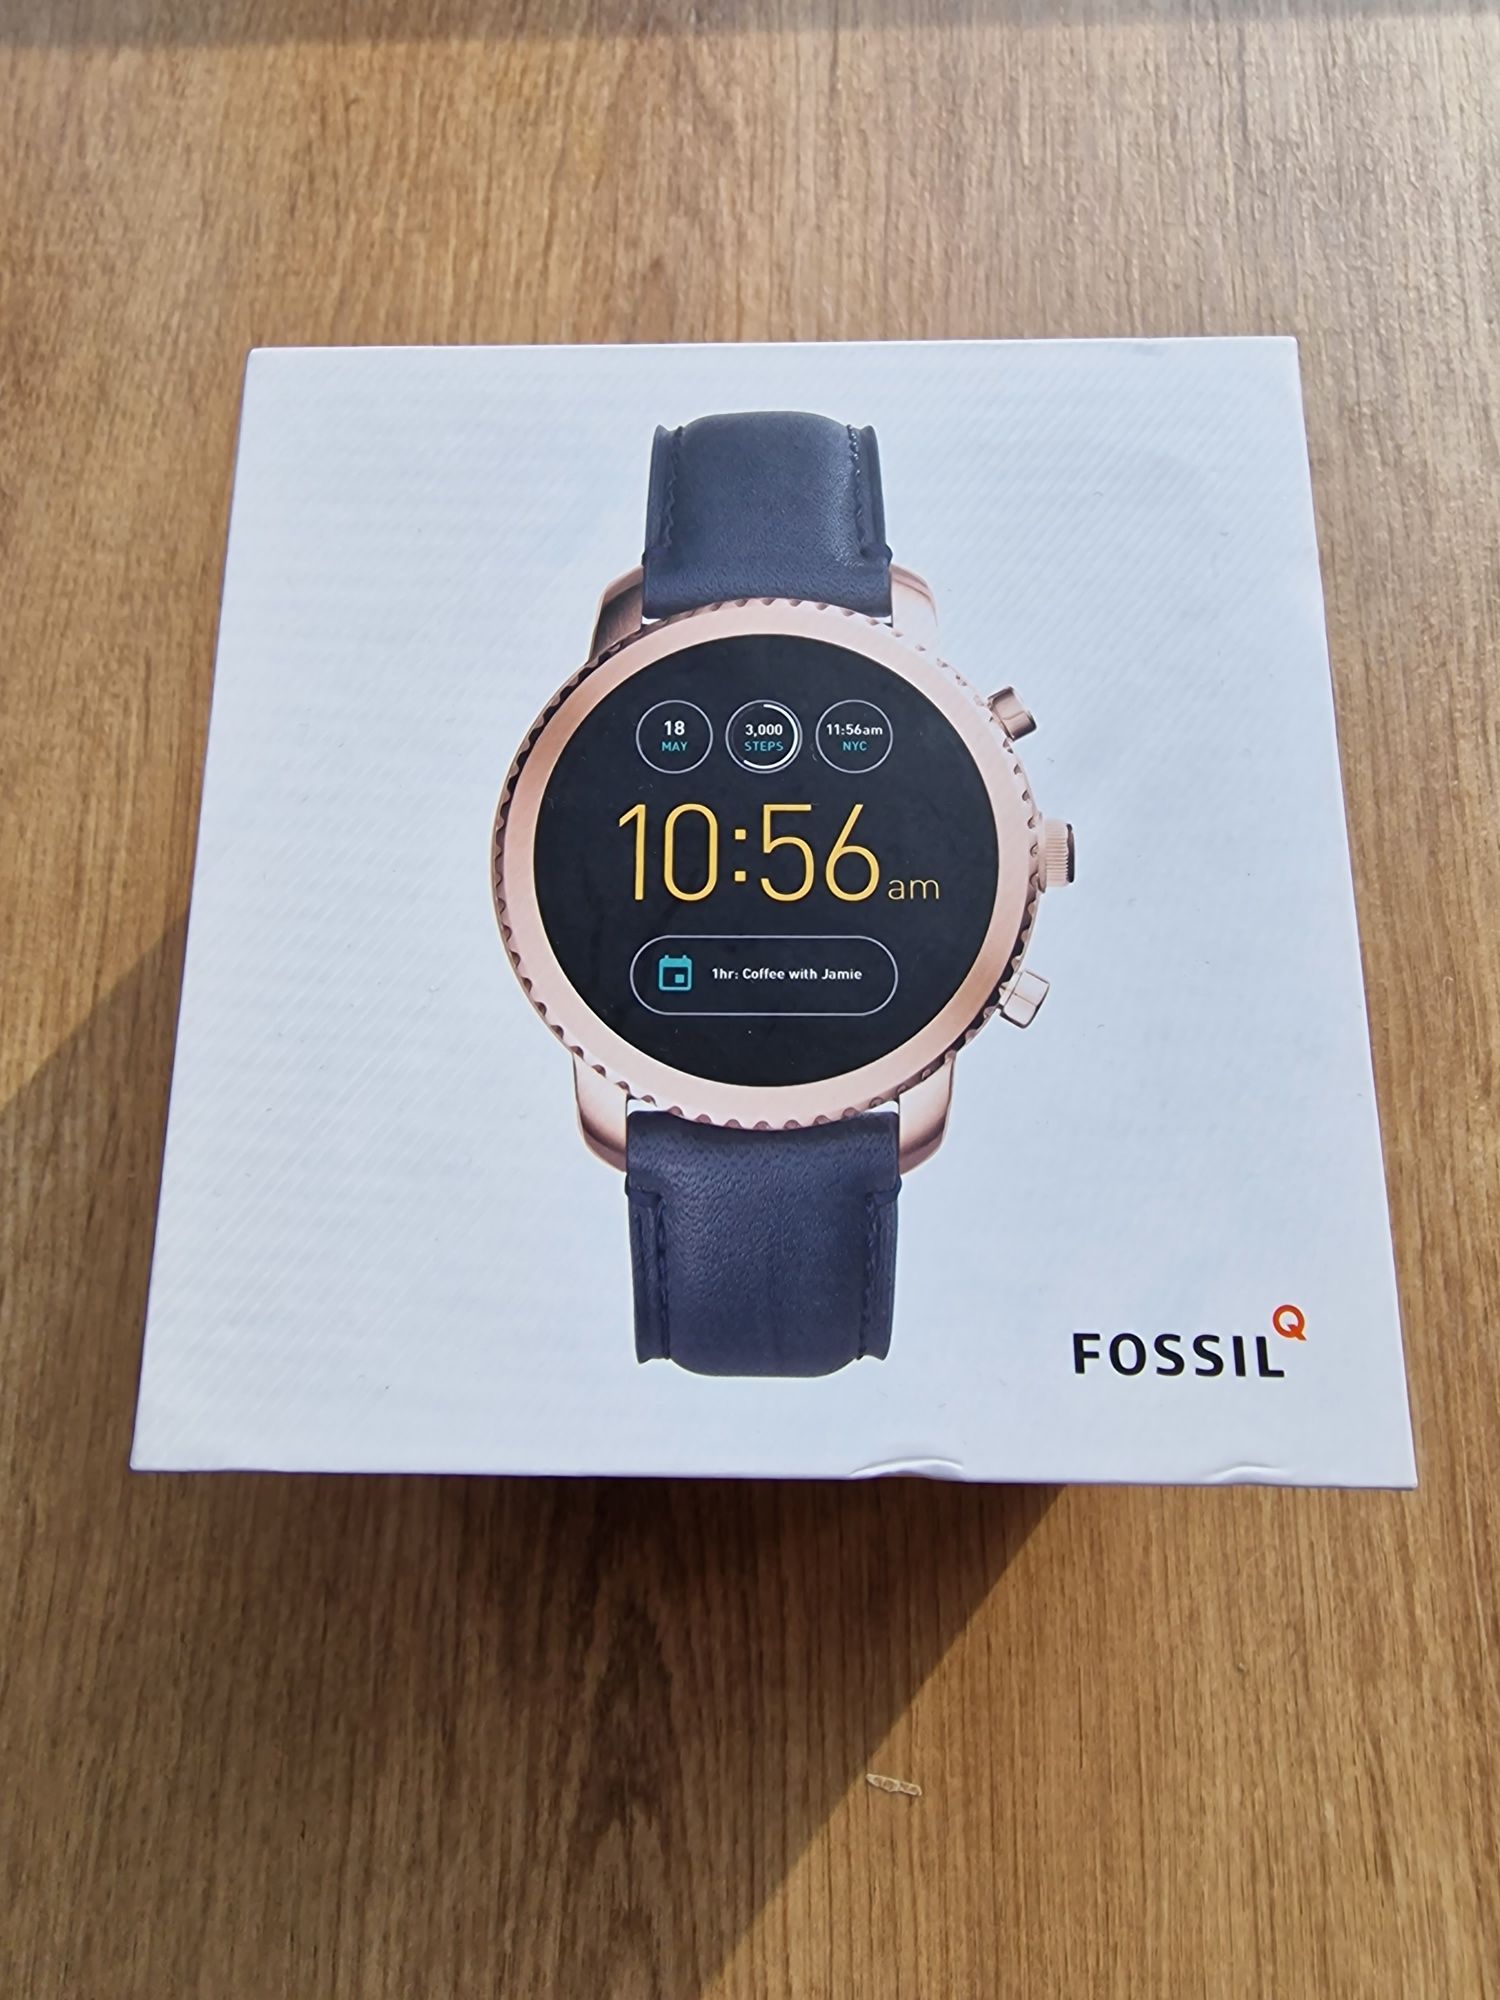 Fossil FTW4002  smartwatch